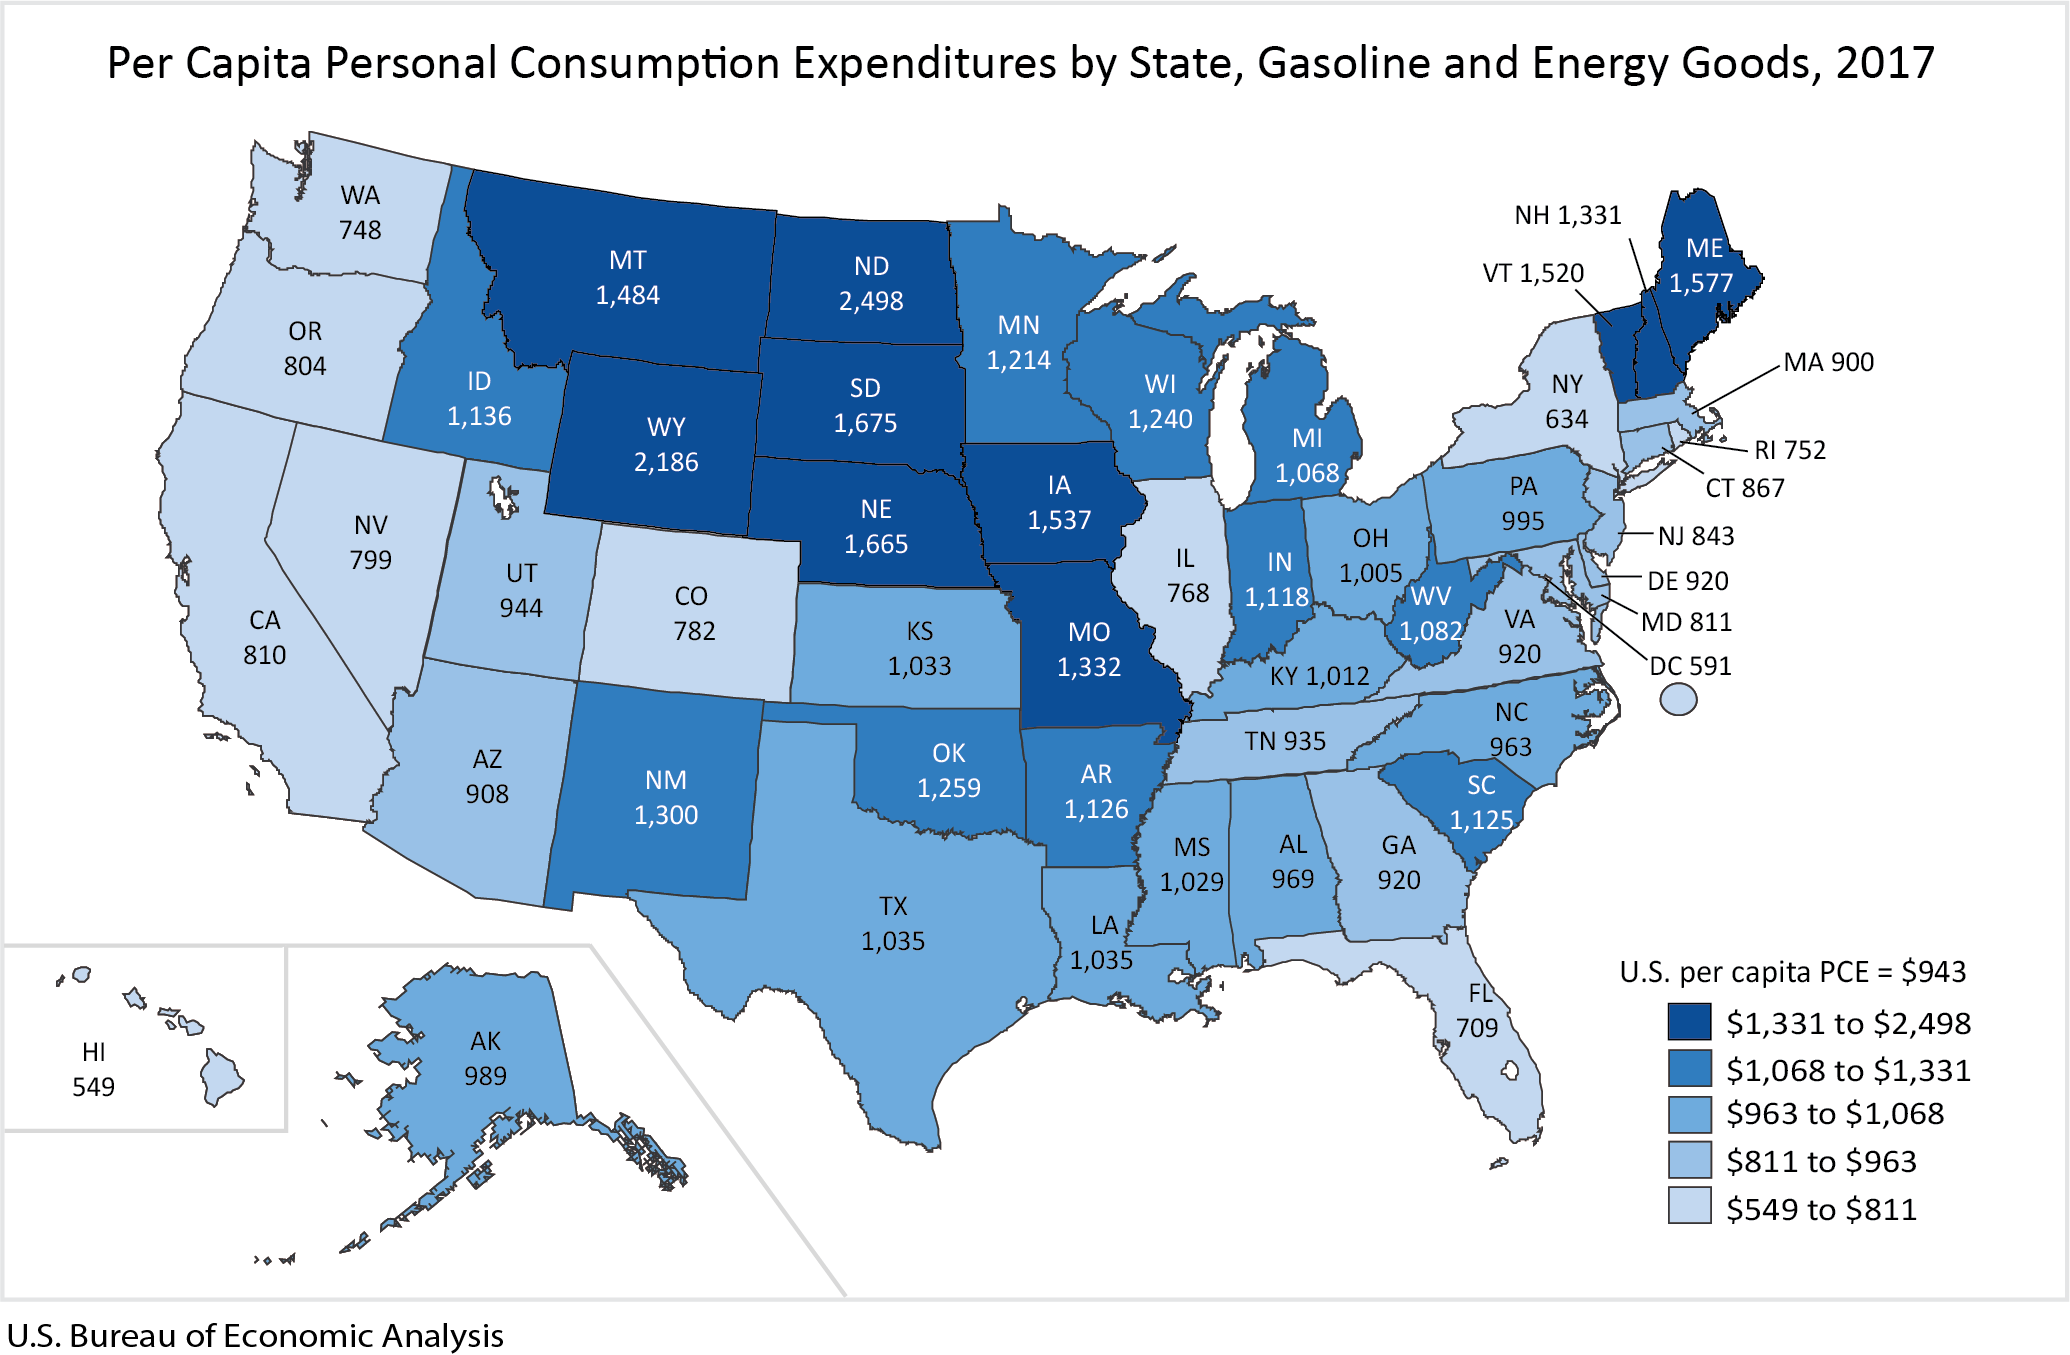 Per Capita Personal Consumption Expenditures by State, Gasoline and Energy Goods, 2017